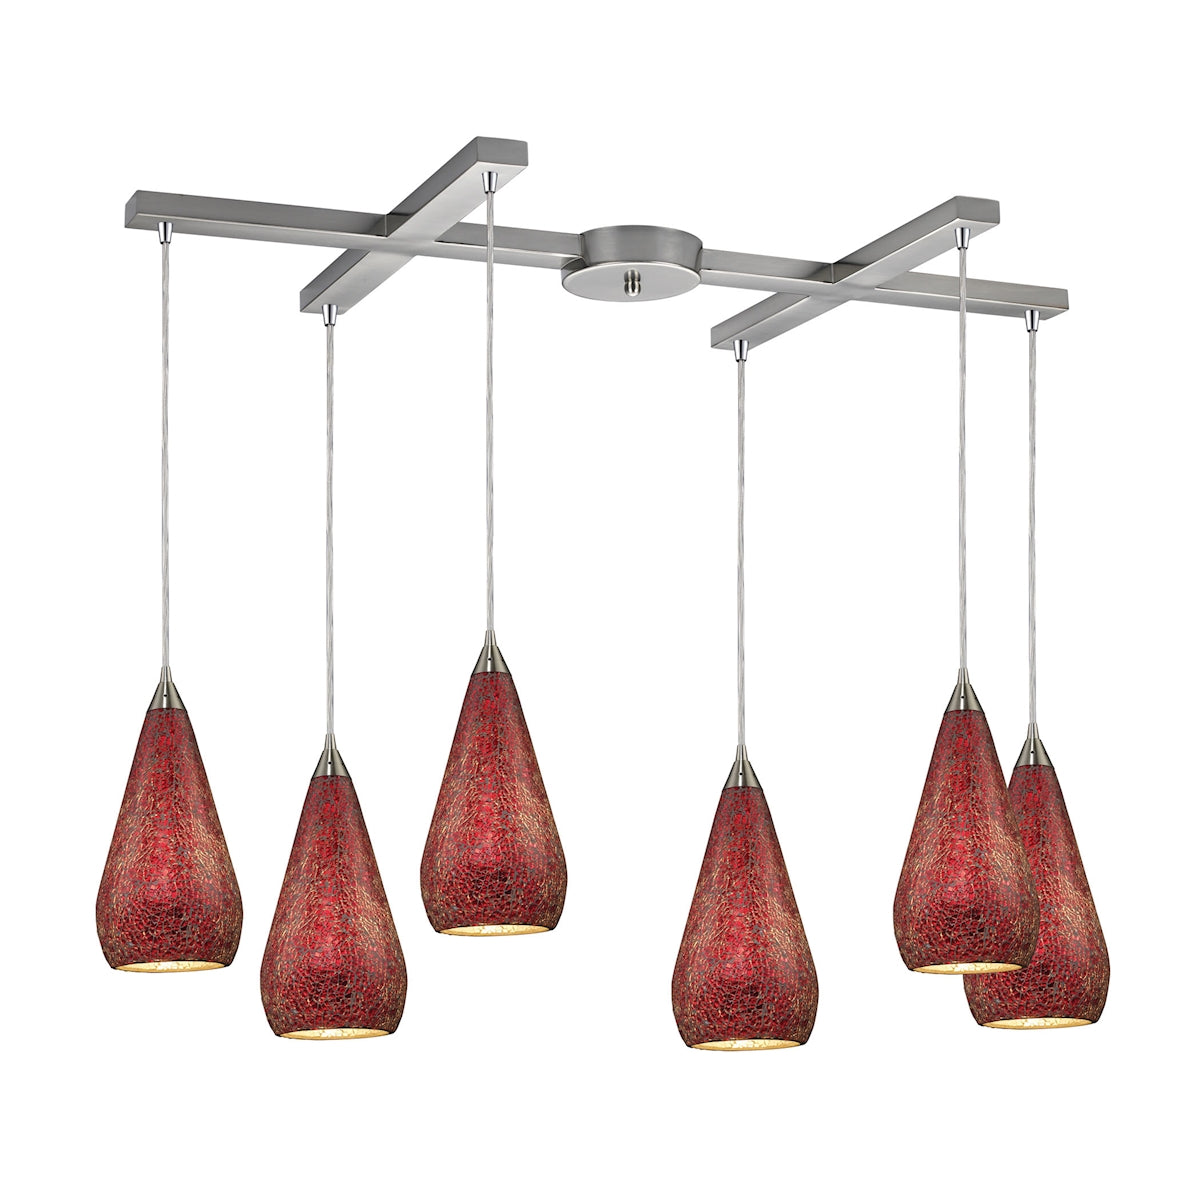 ELK Lighting 546-6RBY-CRC Curvalo 6-Light H-Bar Pendant Fixture in Satin Nickel with Ruby Crackle Glass